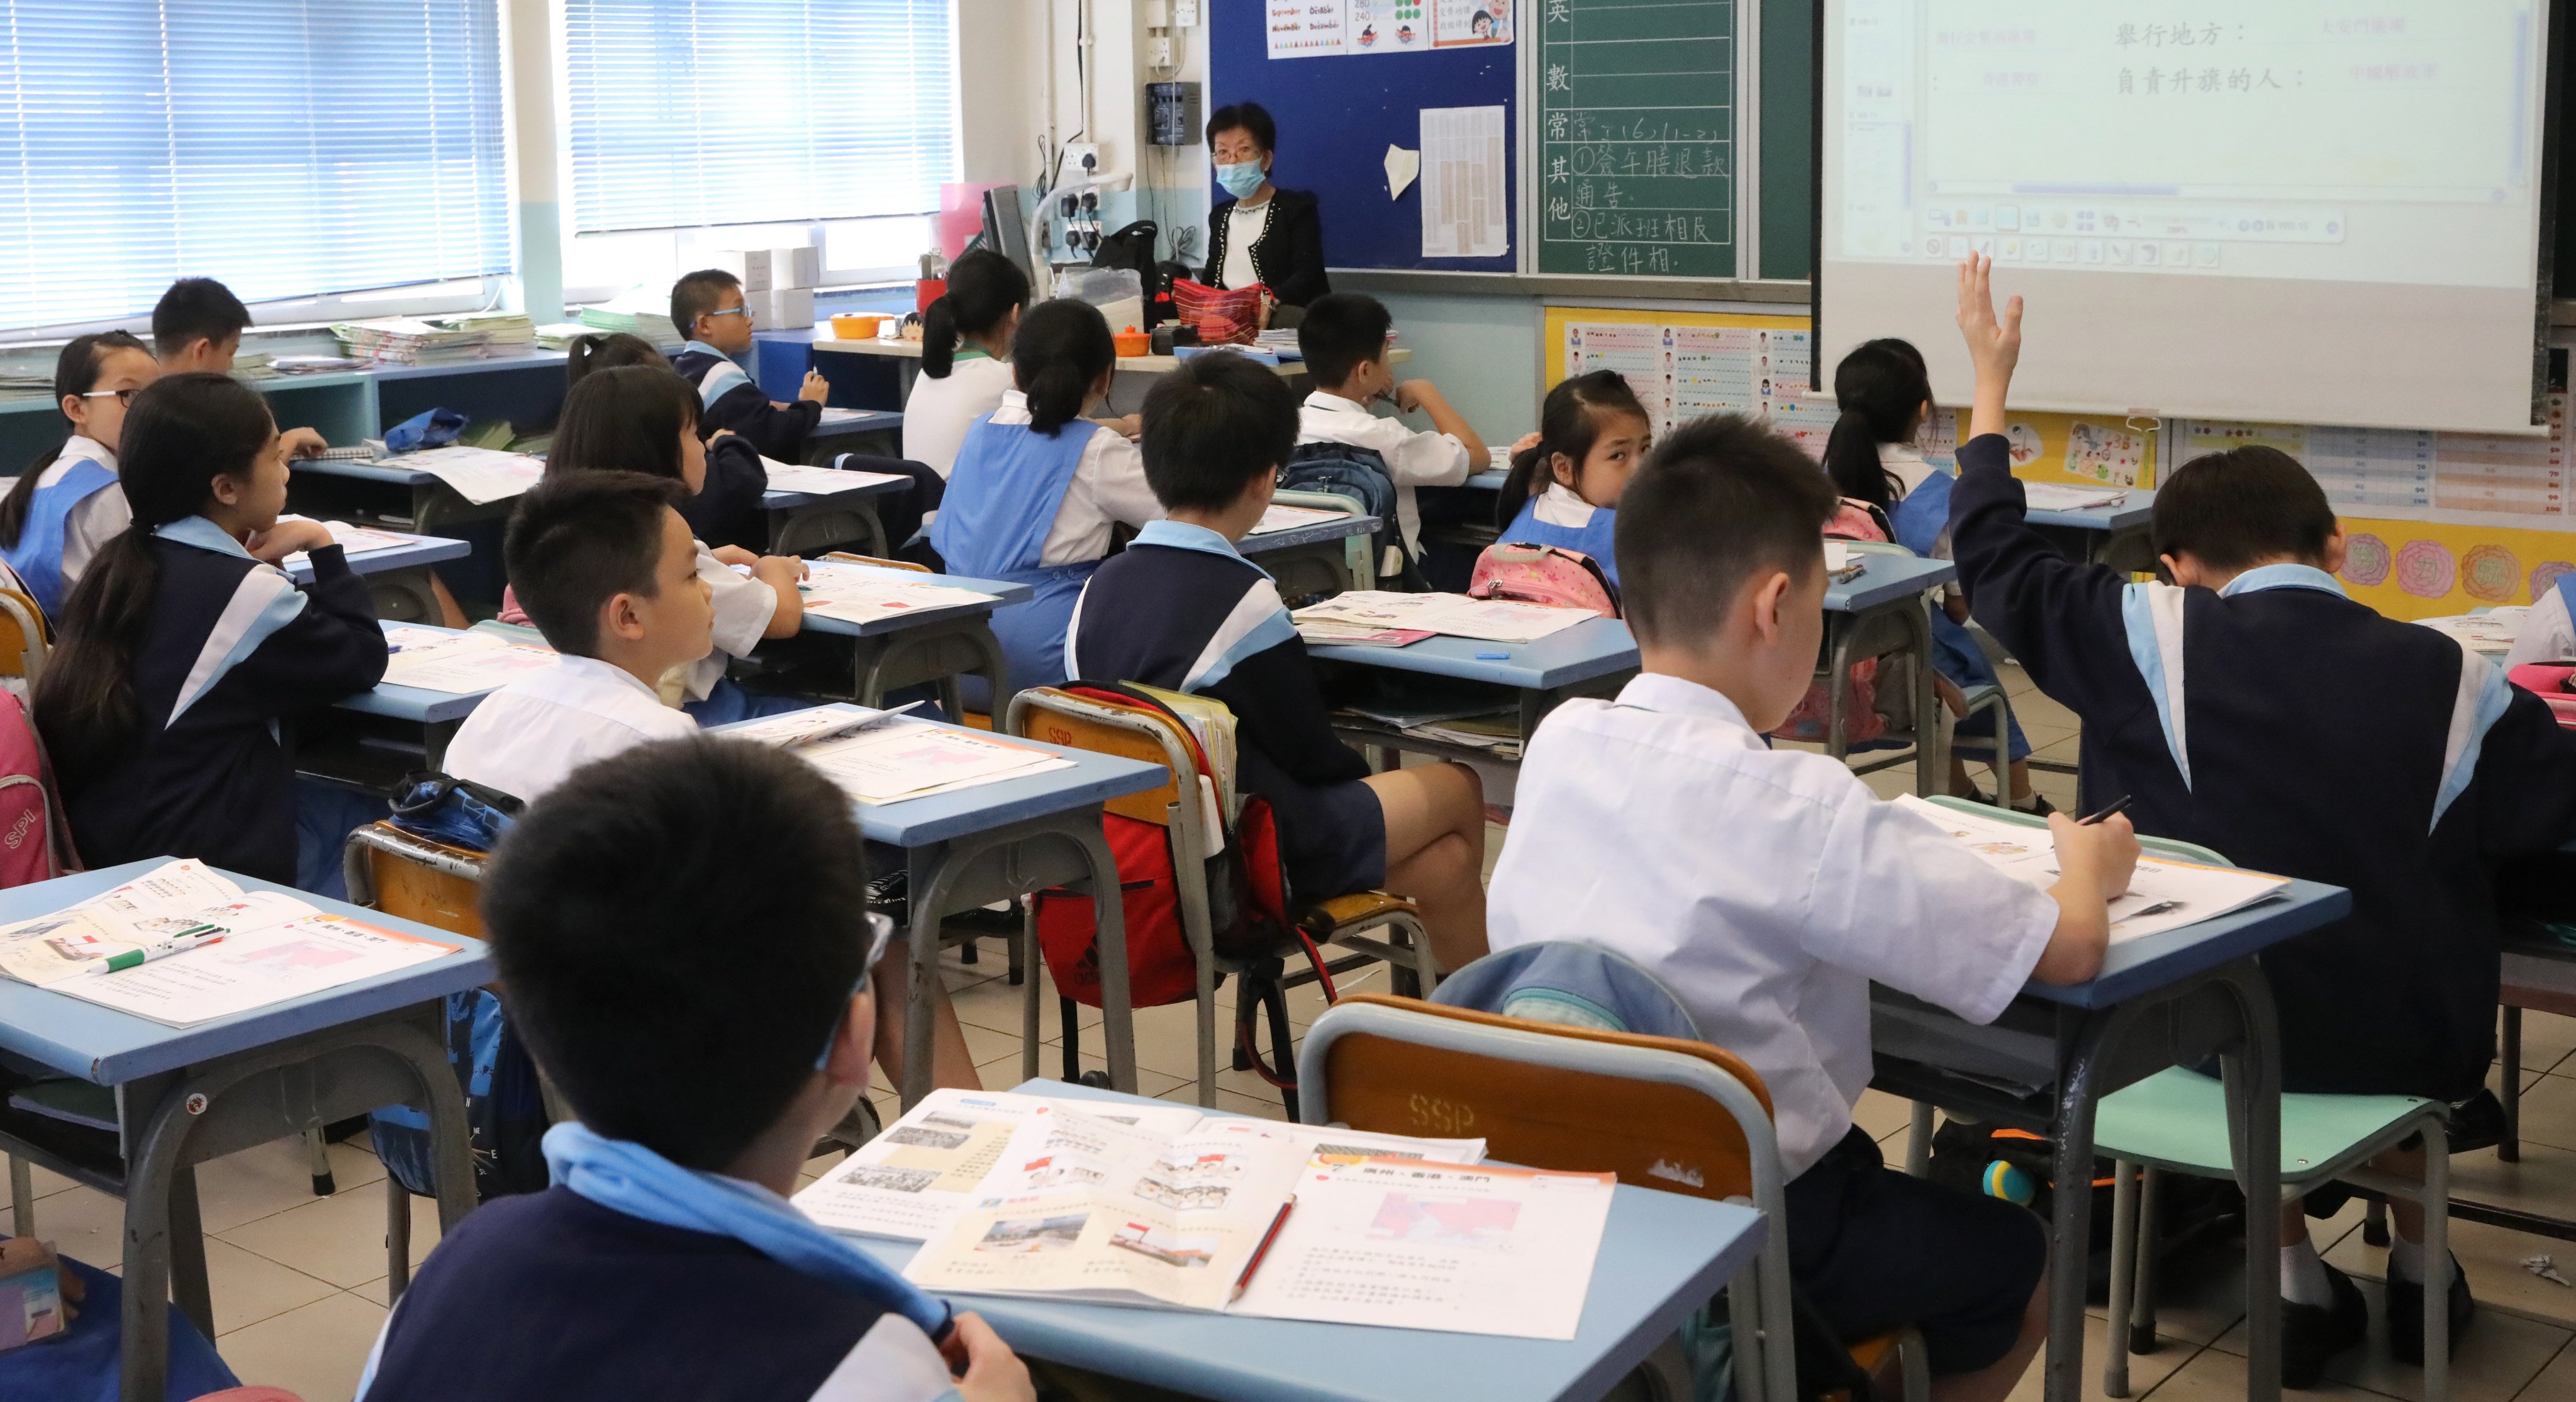 Pupils sit in class at the Shamshuipo Kaifong Welfare Association Primary School in Sham Shui Po. The results from a recent international assessment of students’ creative thinking suggests Hong Kong schools are falling behind in teaching creativity and lateral thinking. Photo: K.Y. Cheng